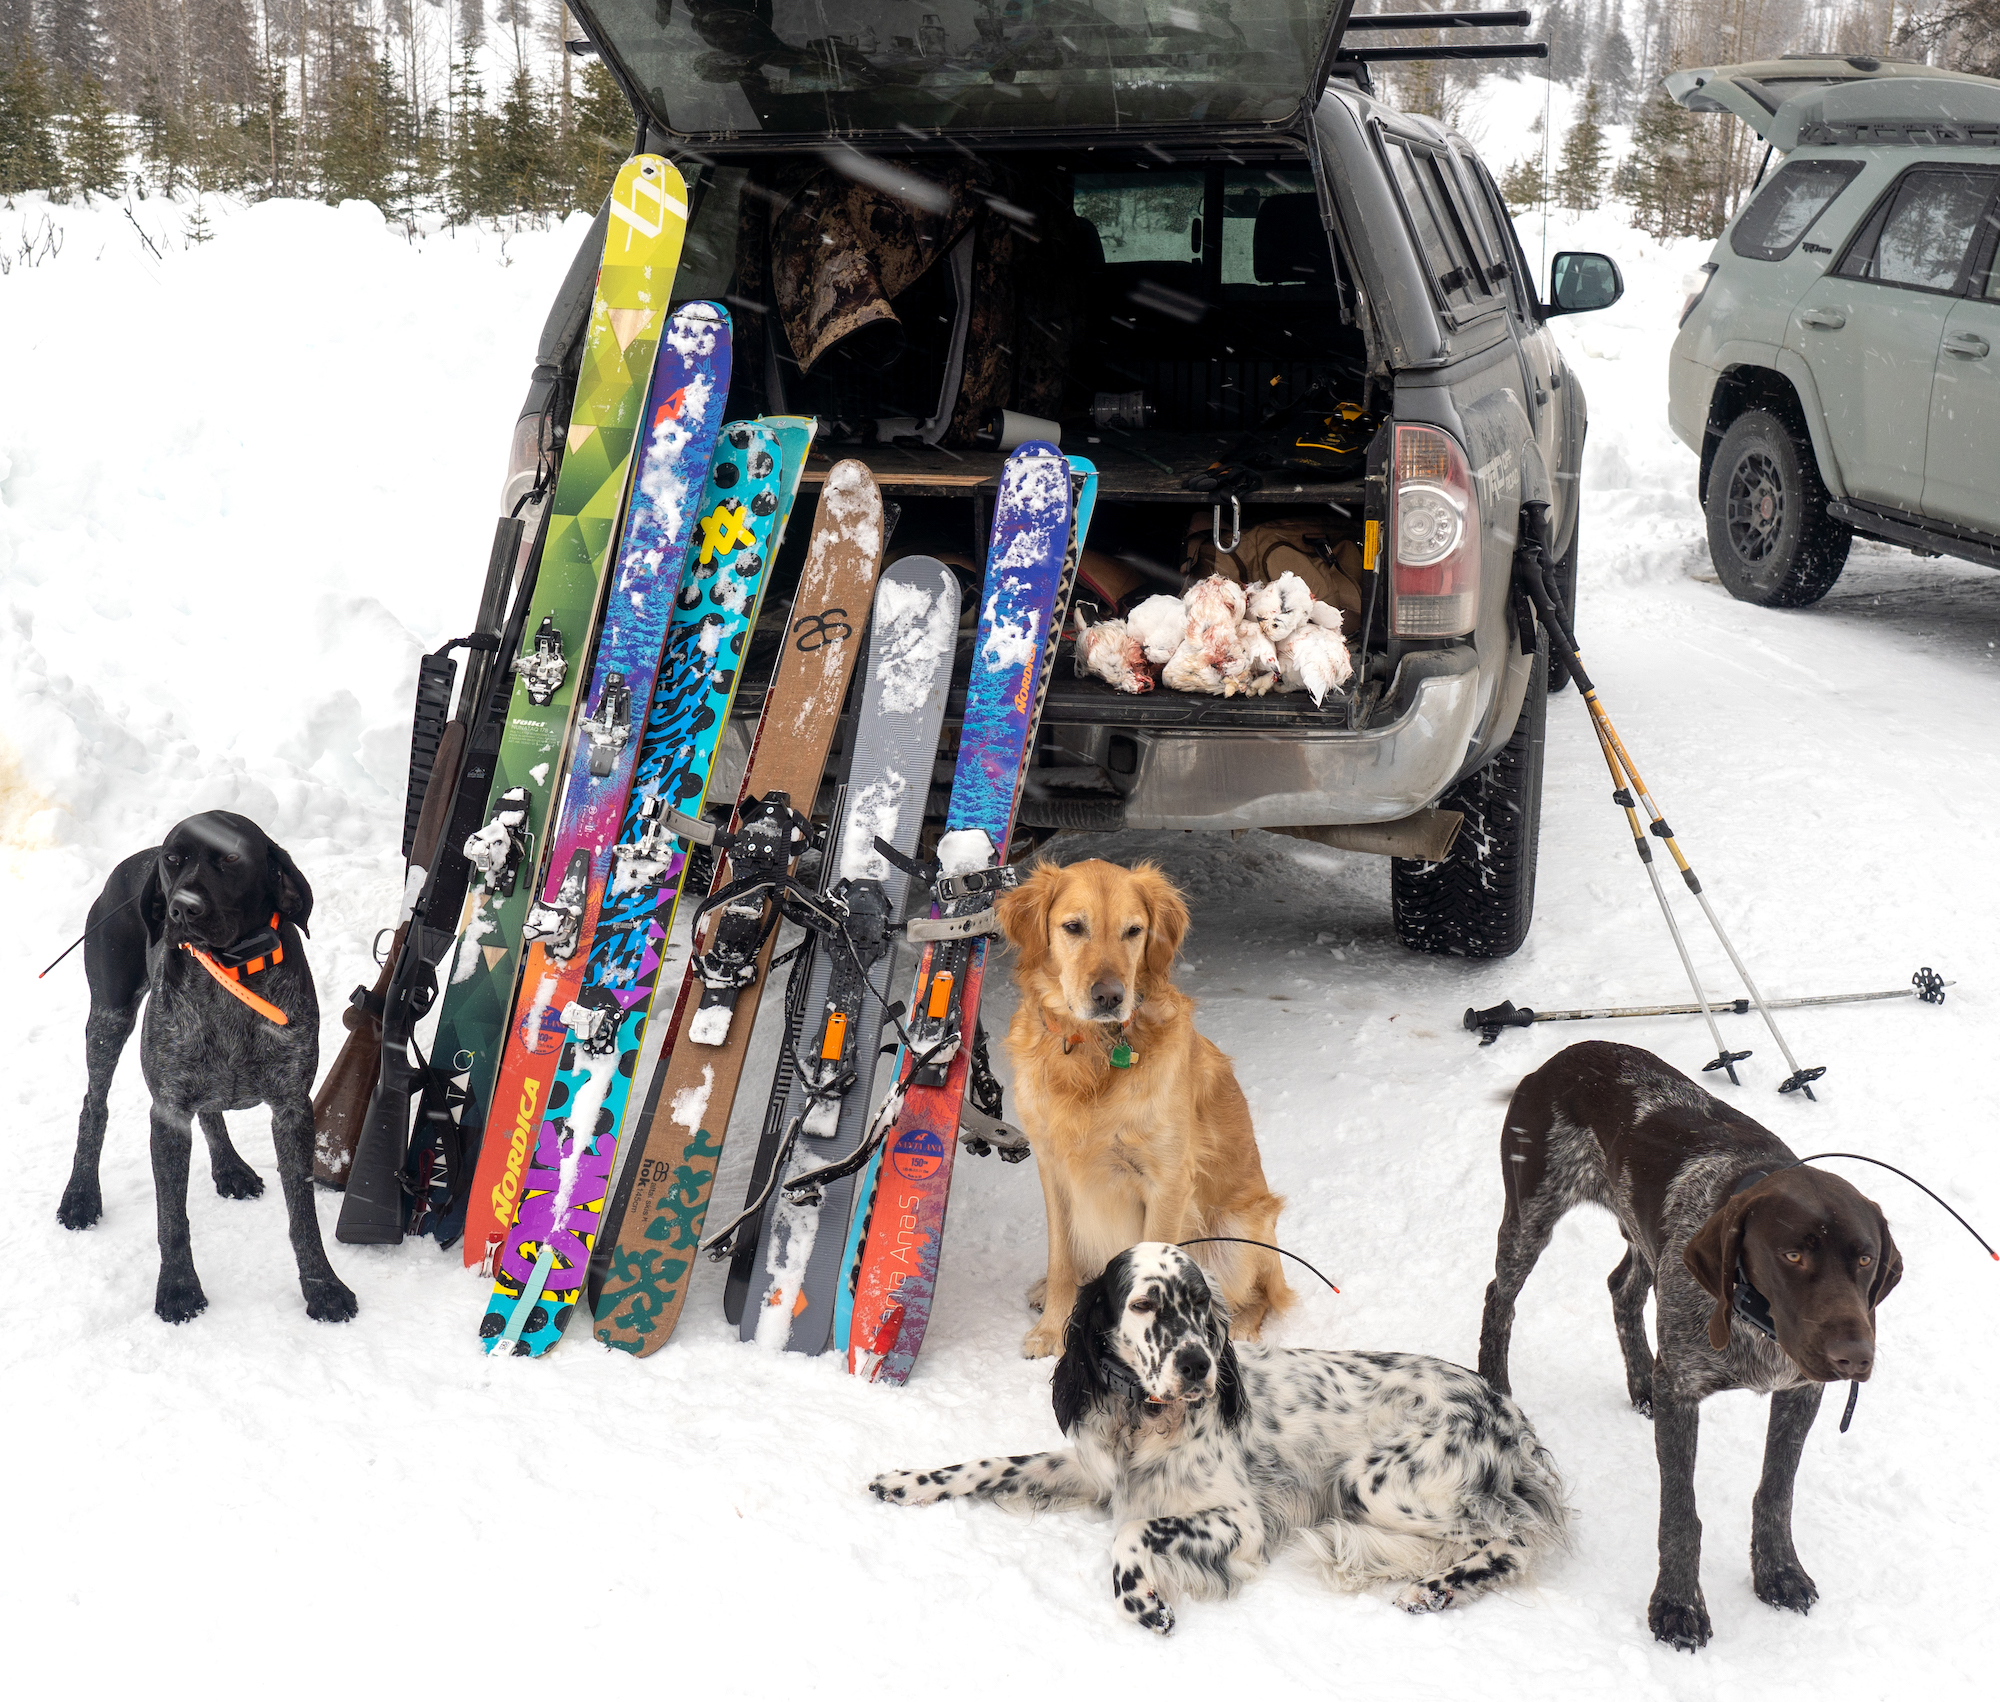 Four dogs sit besides six pairs of skis, two shotguns, and a pile of ptarmigan.